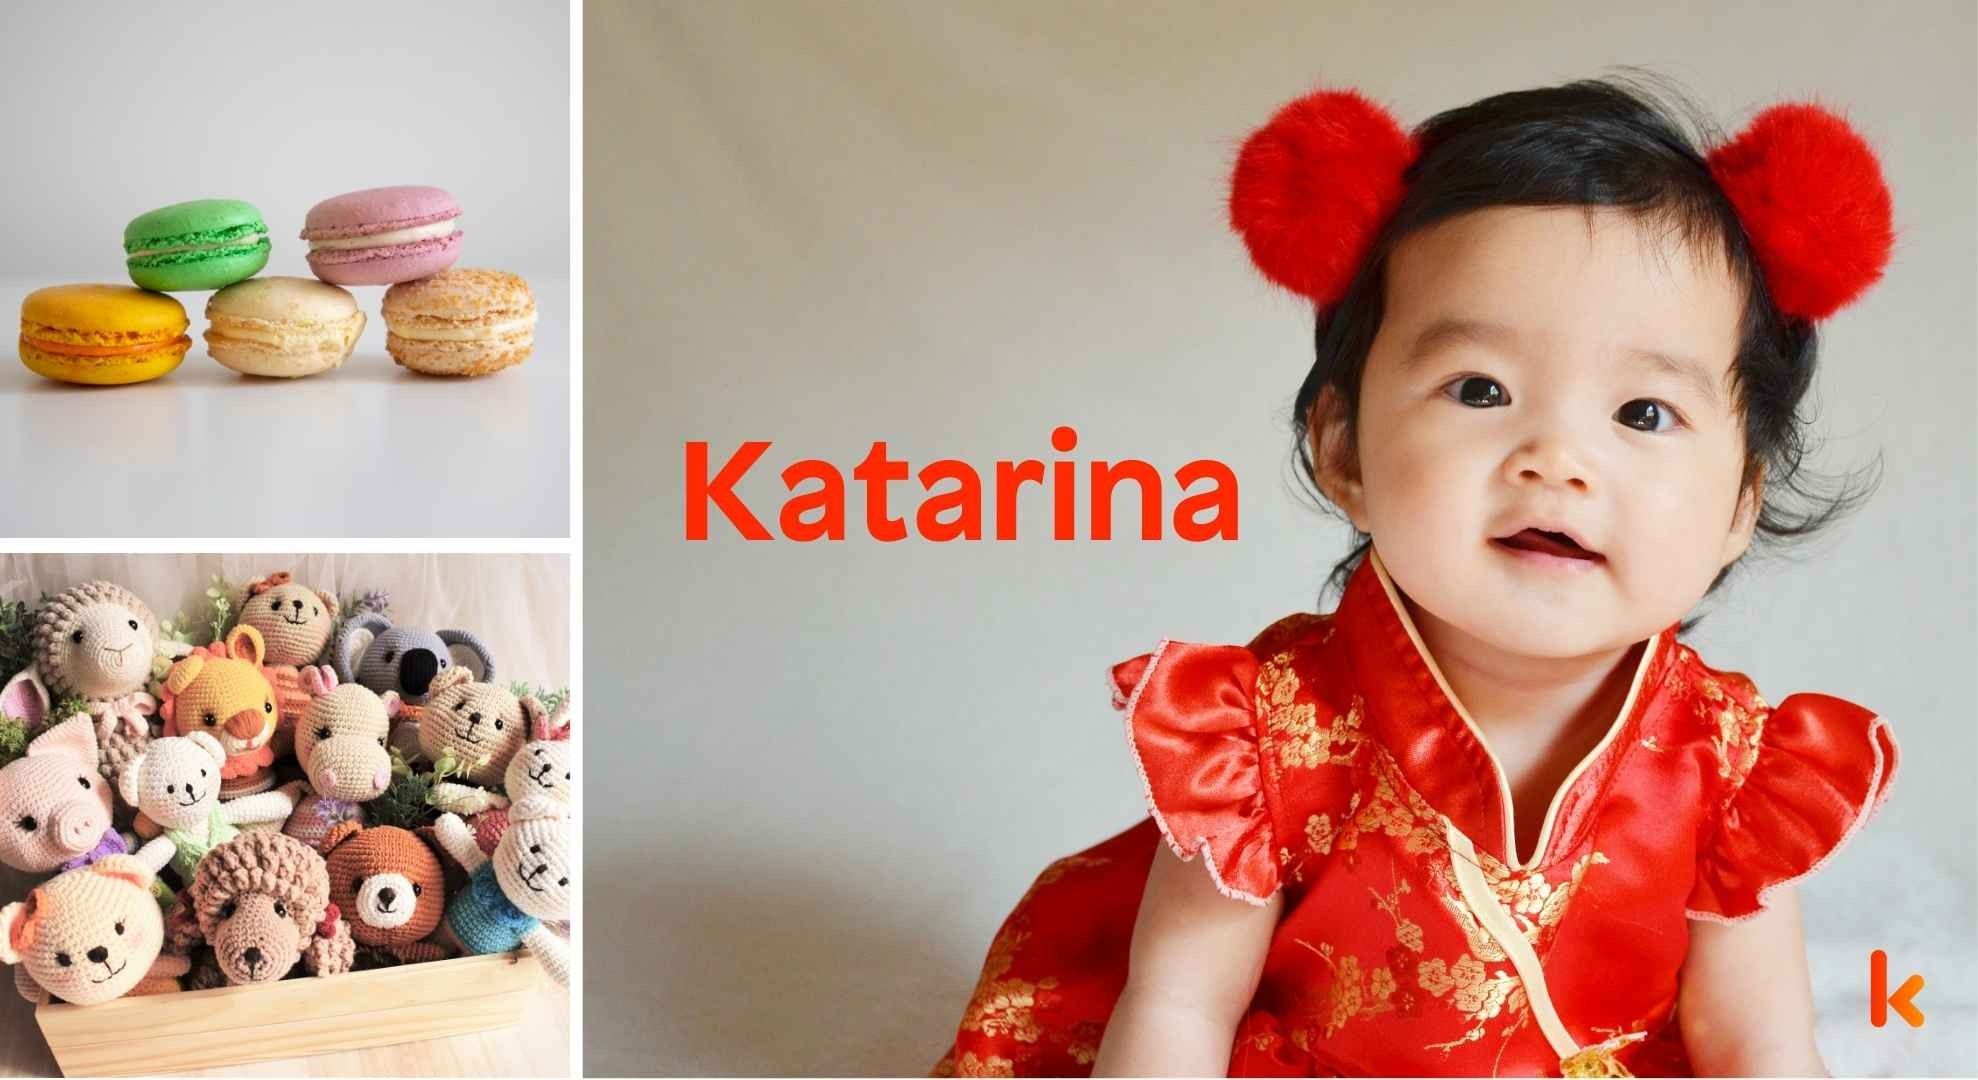 Meaning of the name Katarina